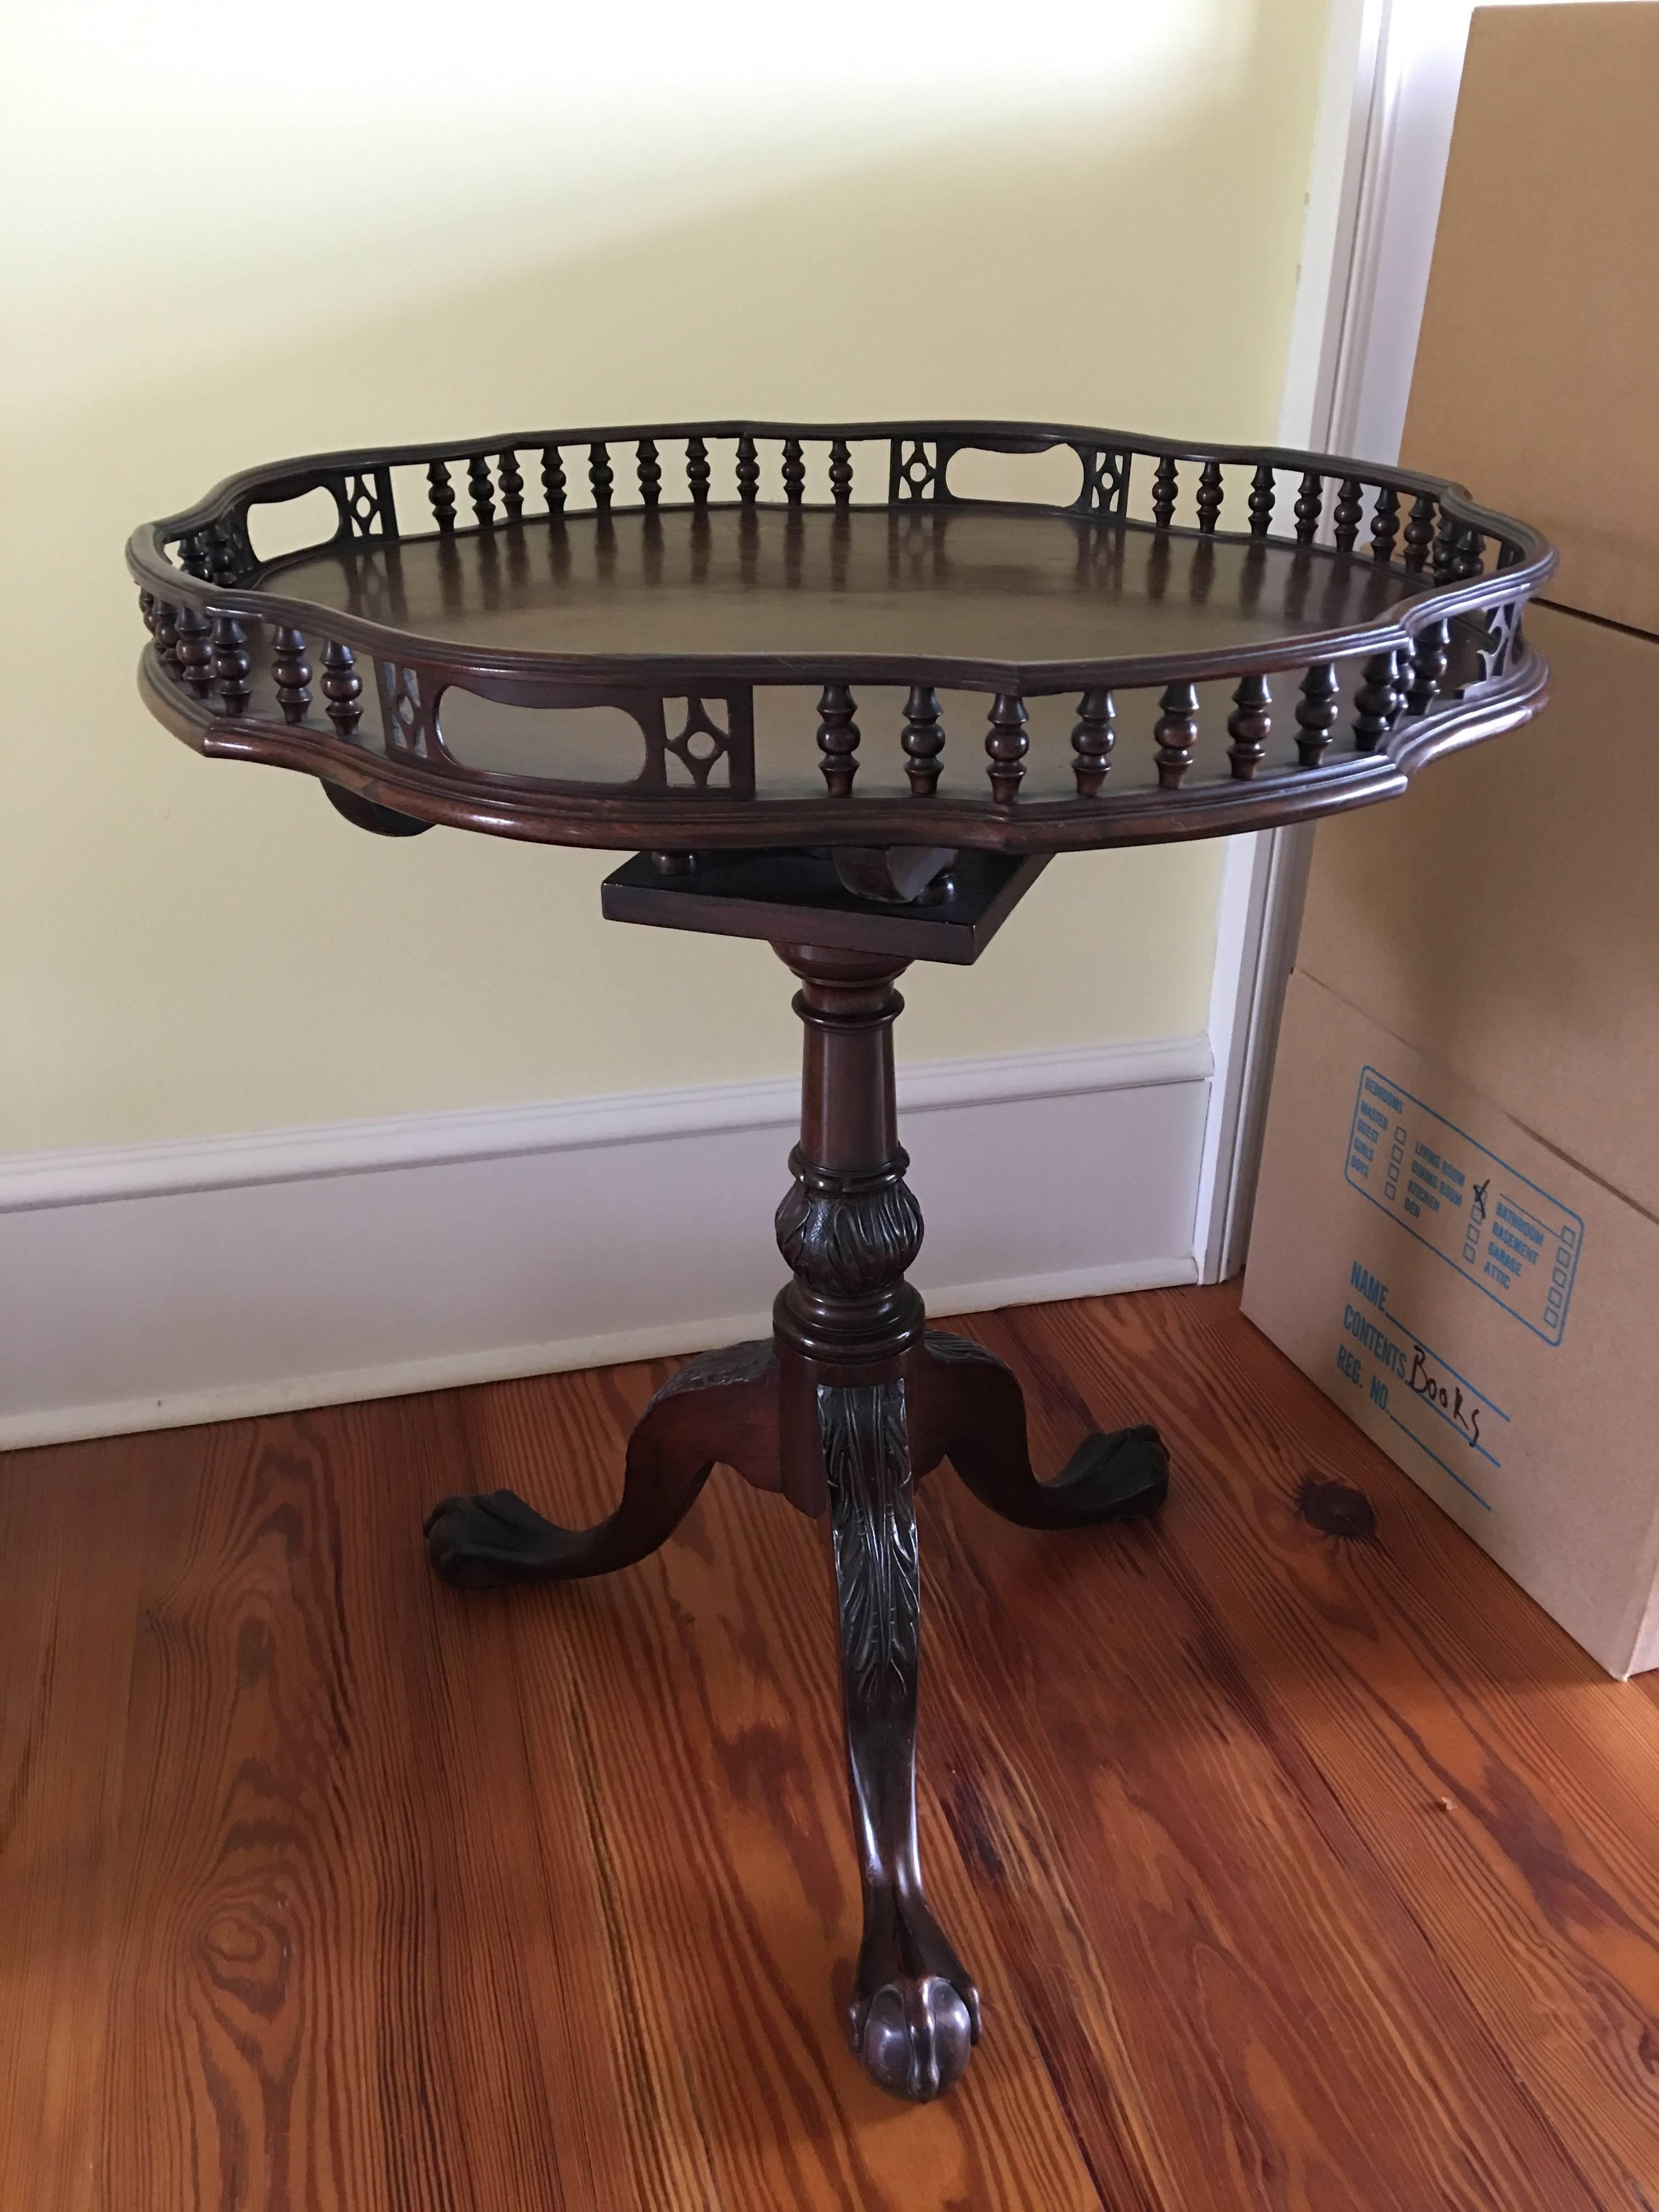 English mahogany shaped and gallery tilt-top table with birdcage, 19th century. It features a shaped and scalloped spindled gallery framing a conforming top, surmounting a birdcage housing a flip-top mechanism, riding above a relief-carved tapering